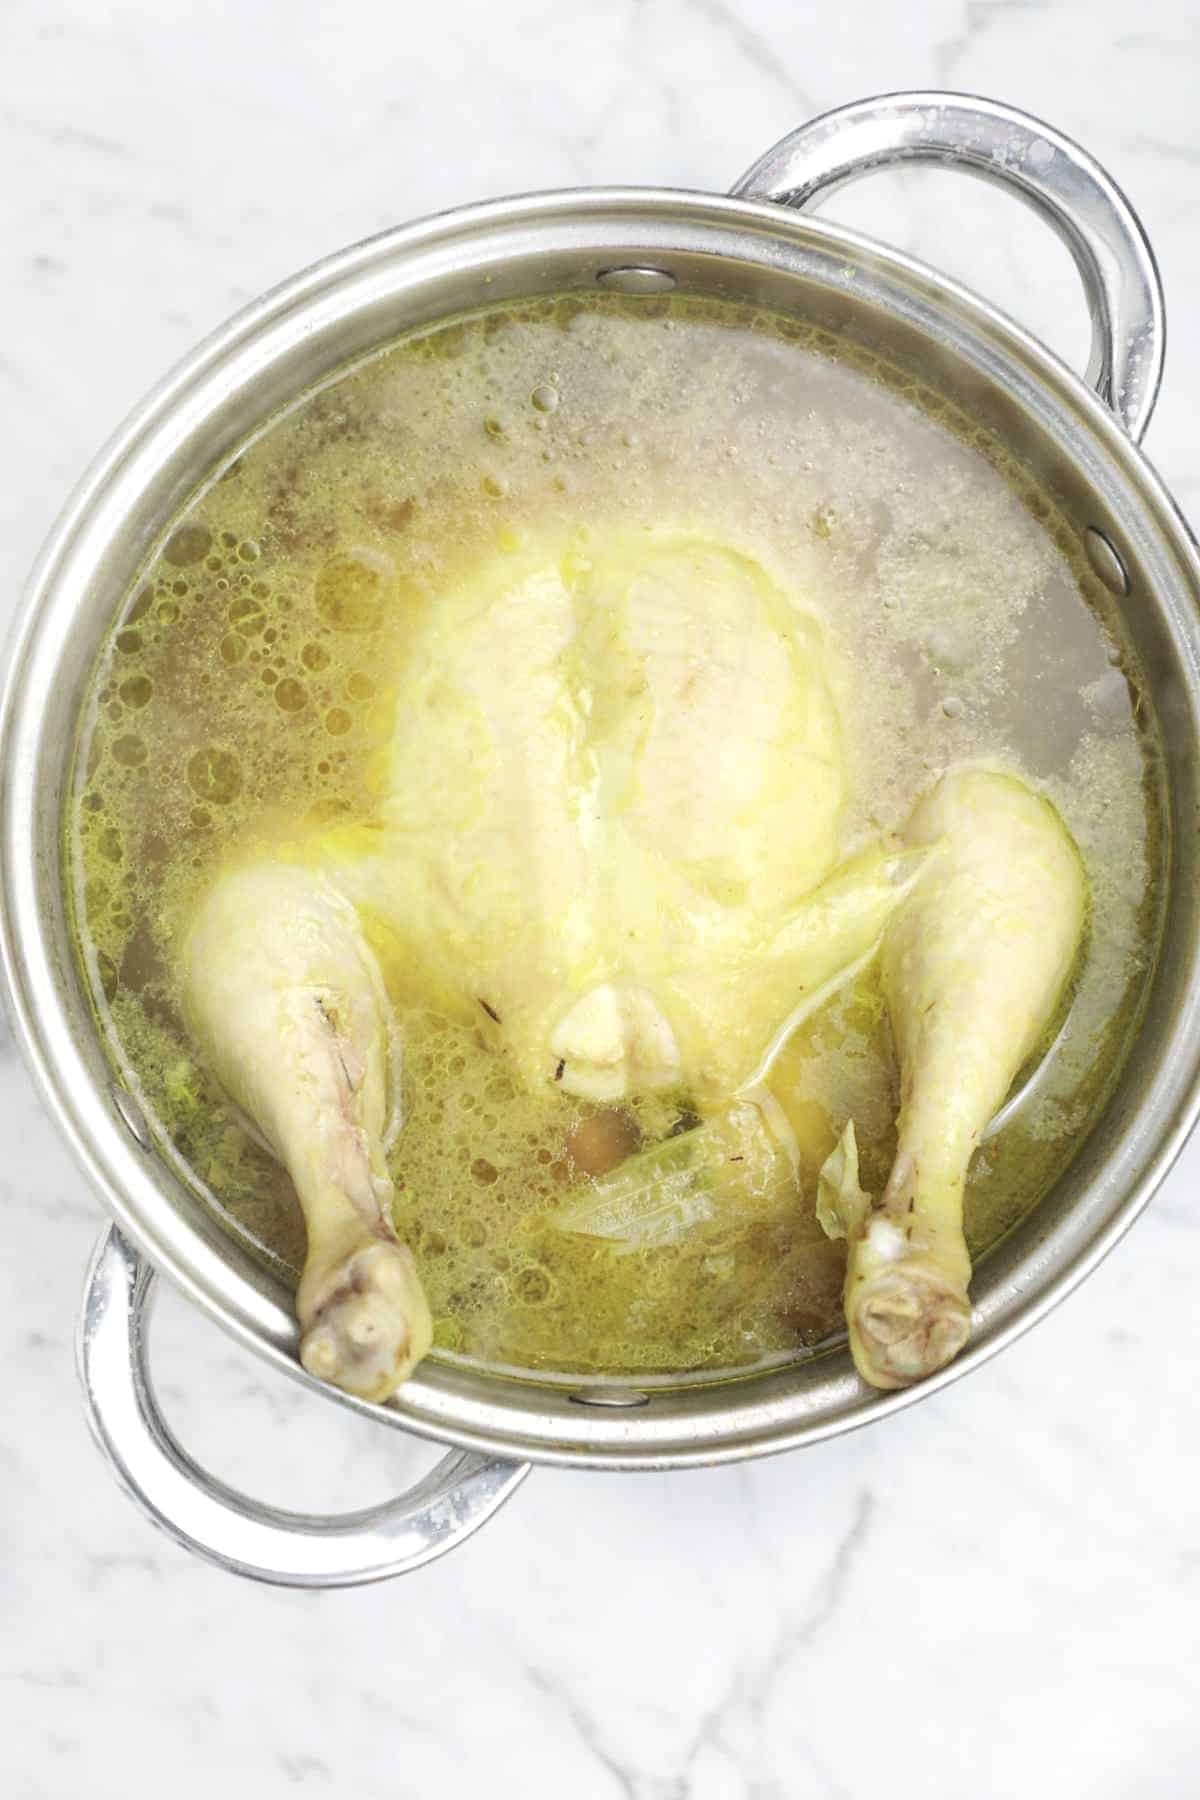 Put the whole chicken in the pot of broth.